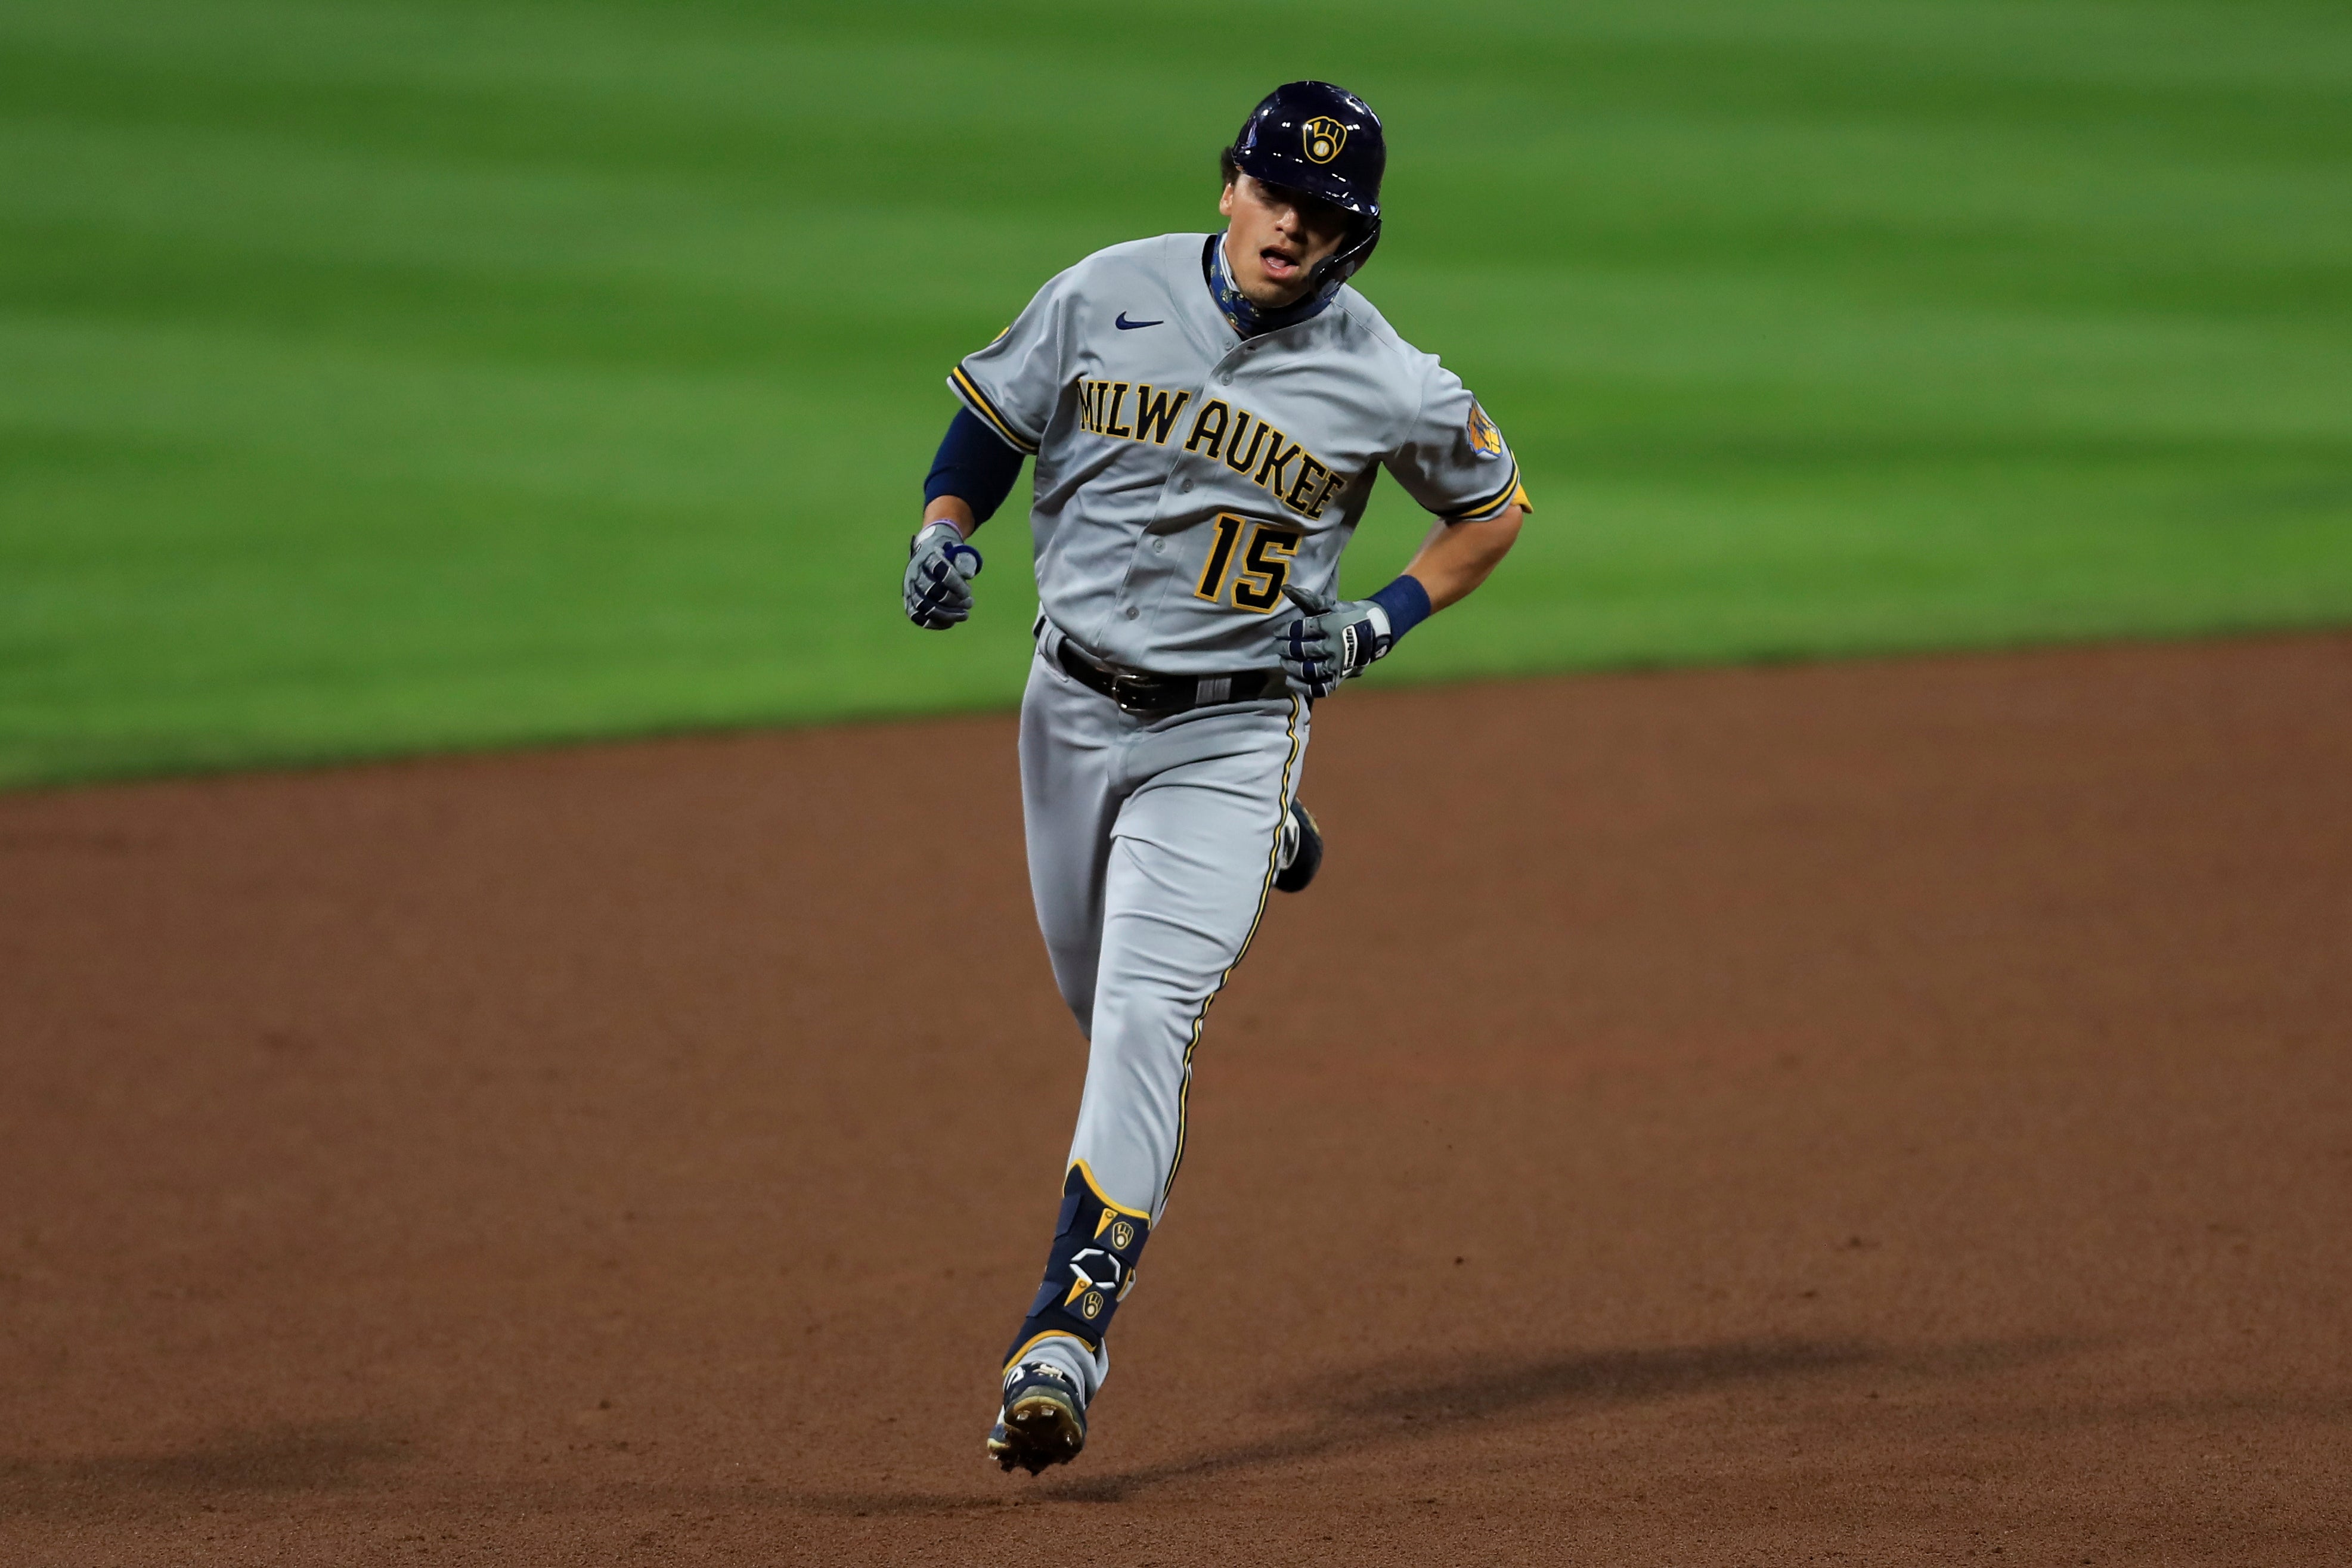 Milwaukee Brewers - Infielder Mike Moustakas has been signed to a